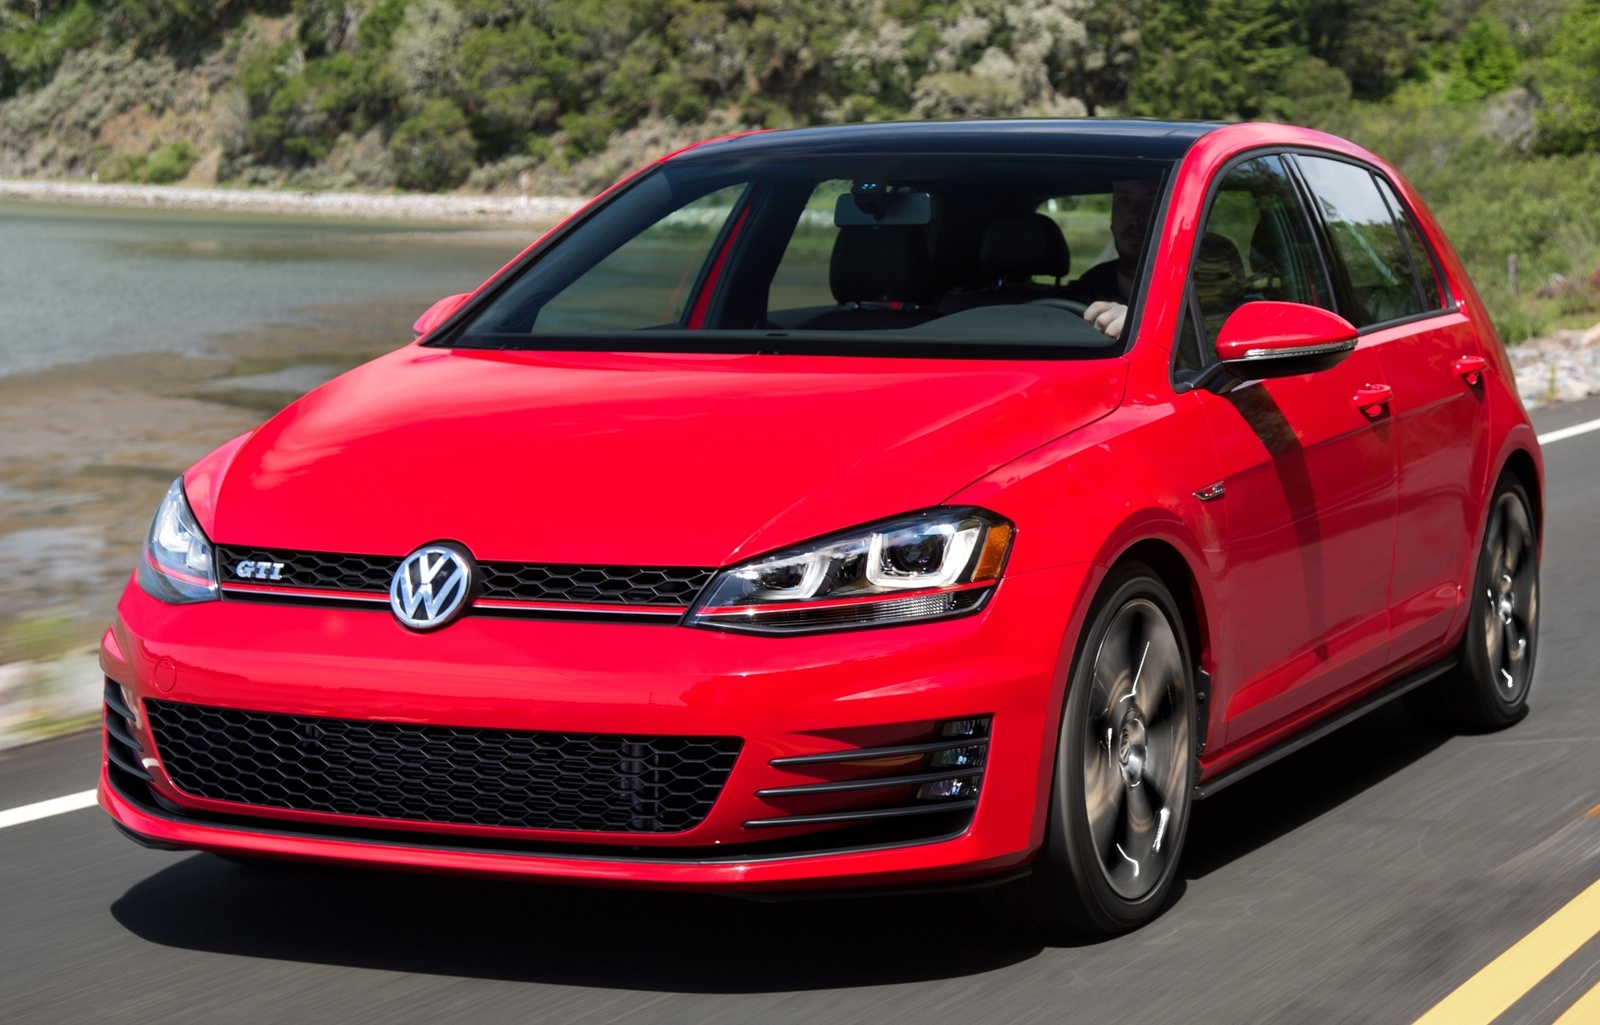 2015 Volkswagen Golf GTI: Prices, Reviews & Pictures - CarGurus